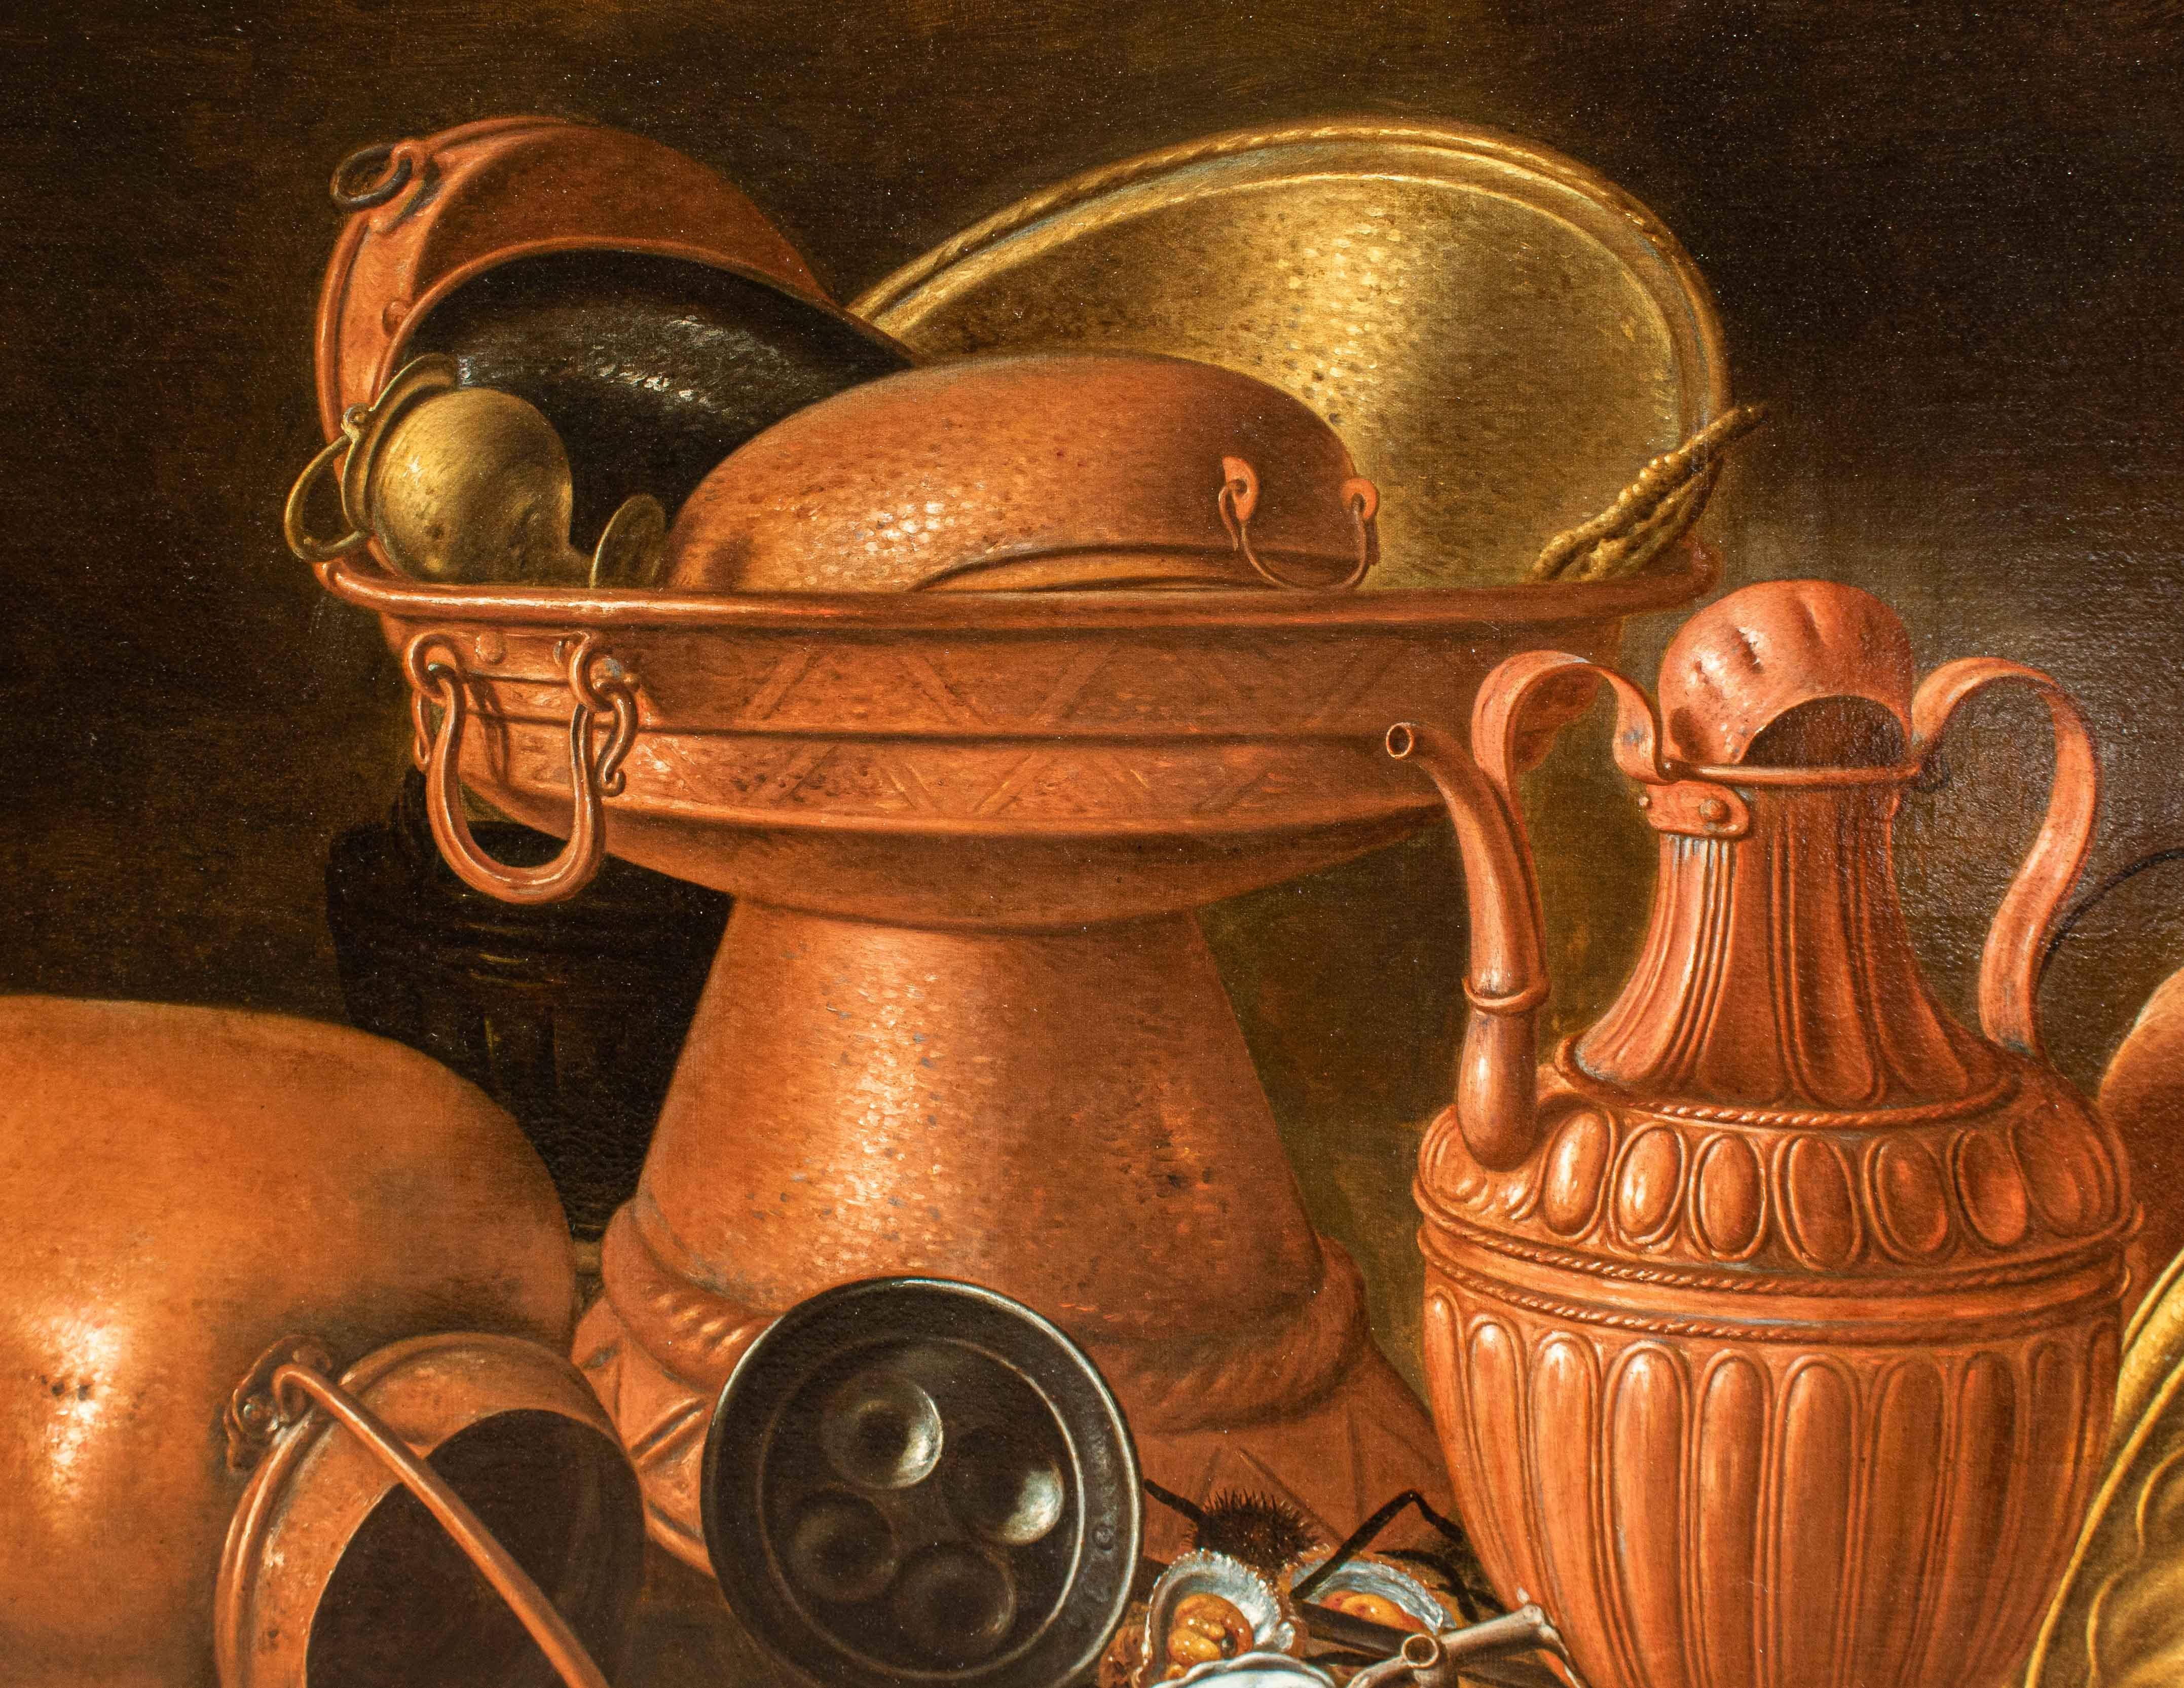 Still Life with Dishes Painting Oil on Canvas Giuseppe Ruoppolo For Sale 5